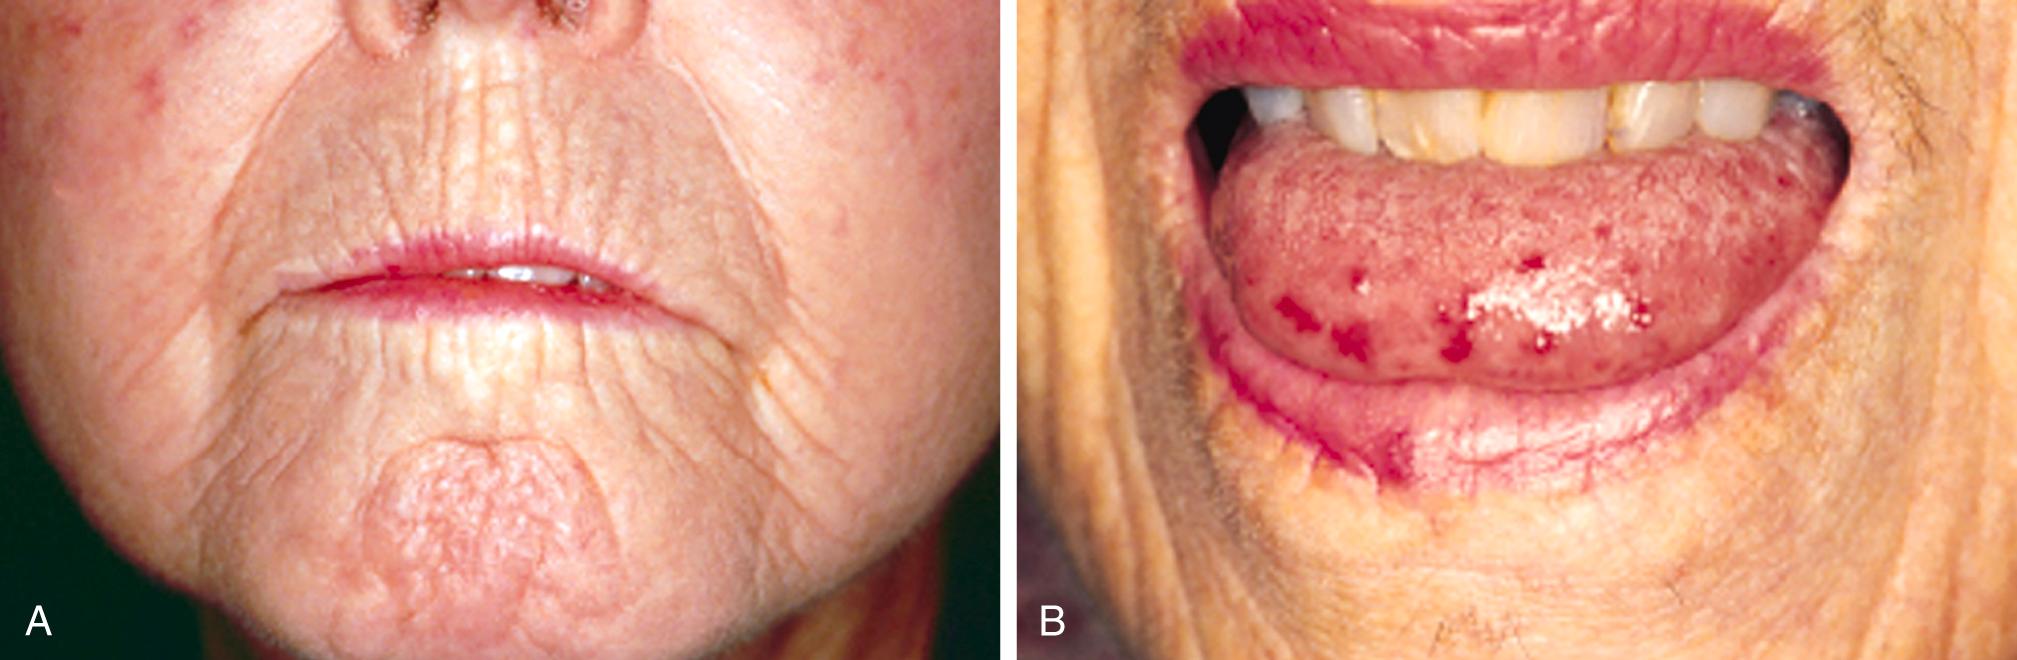 FIGURE 246-1, Facial features in systemic sclerosis.